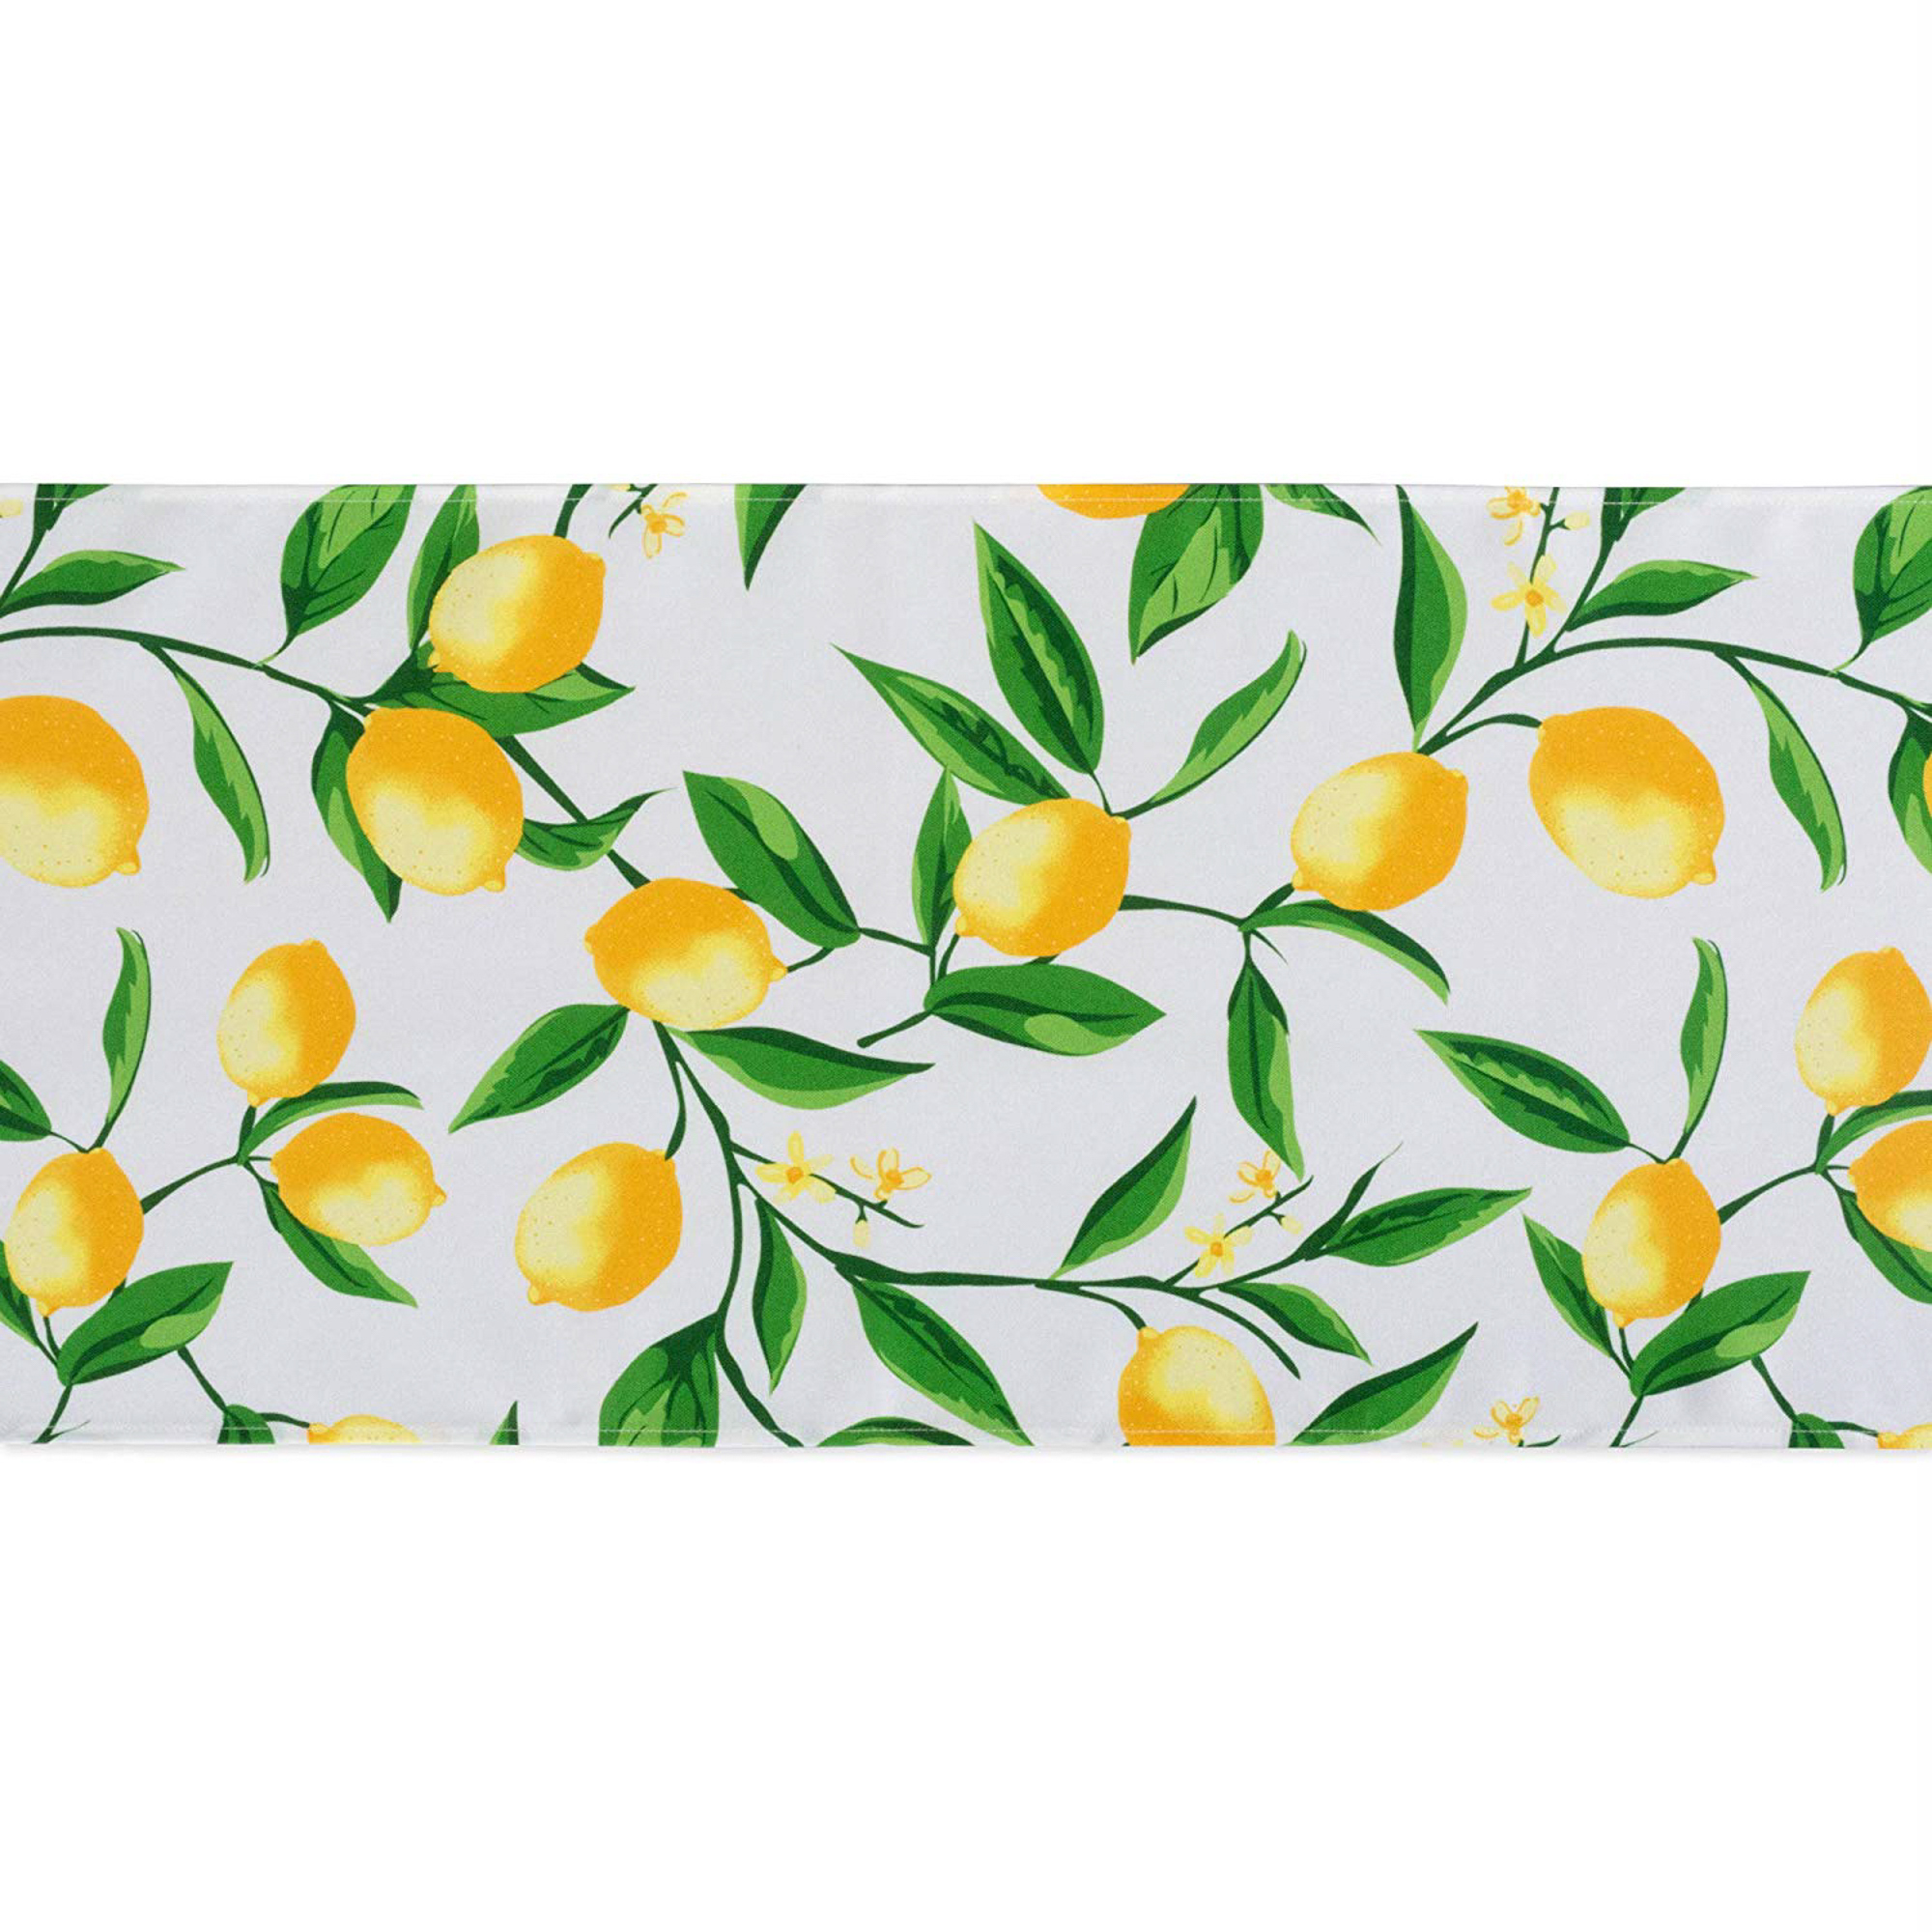 DII Lemon Bliss Print Outdoor Table Runner 14x108 inches